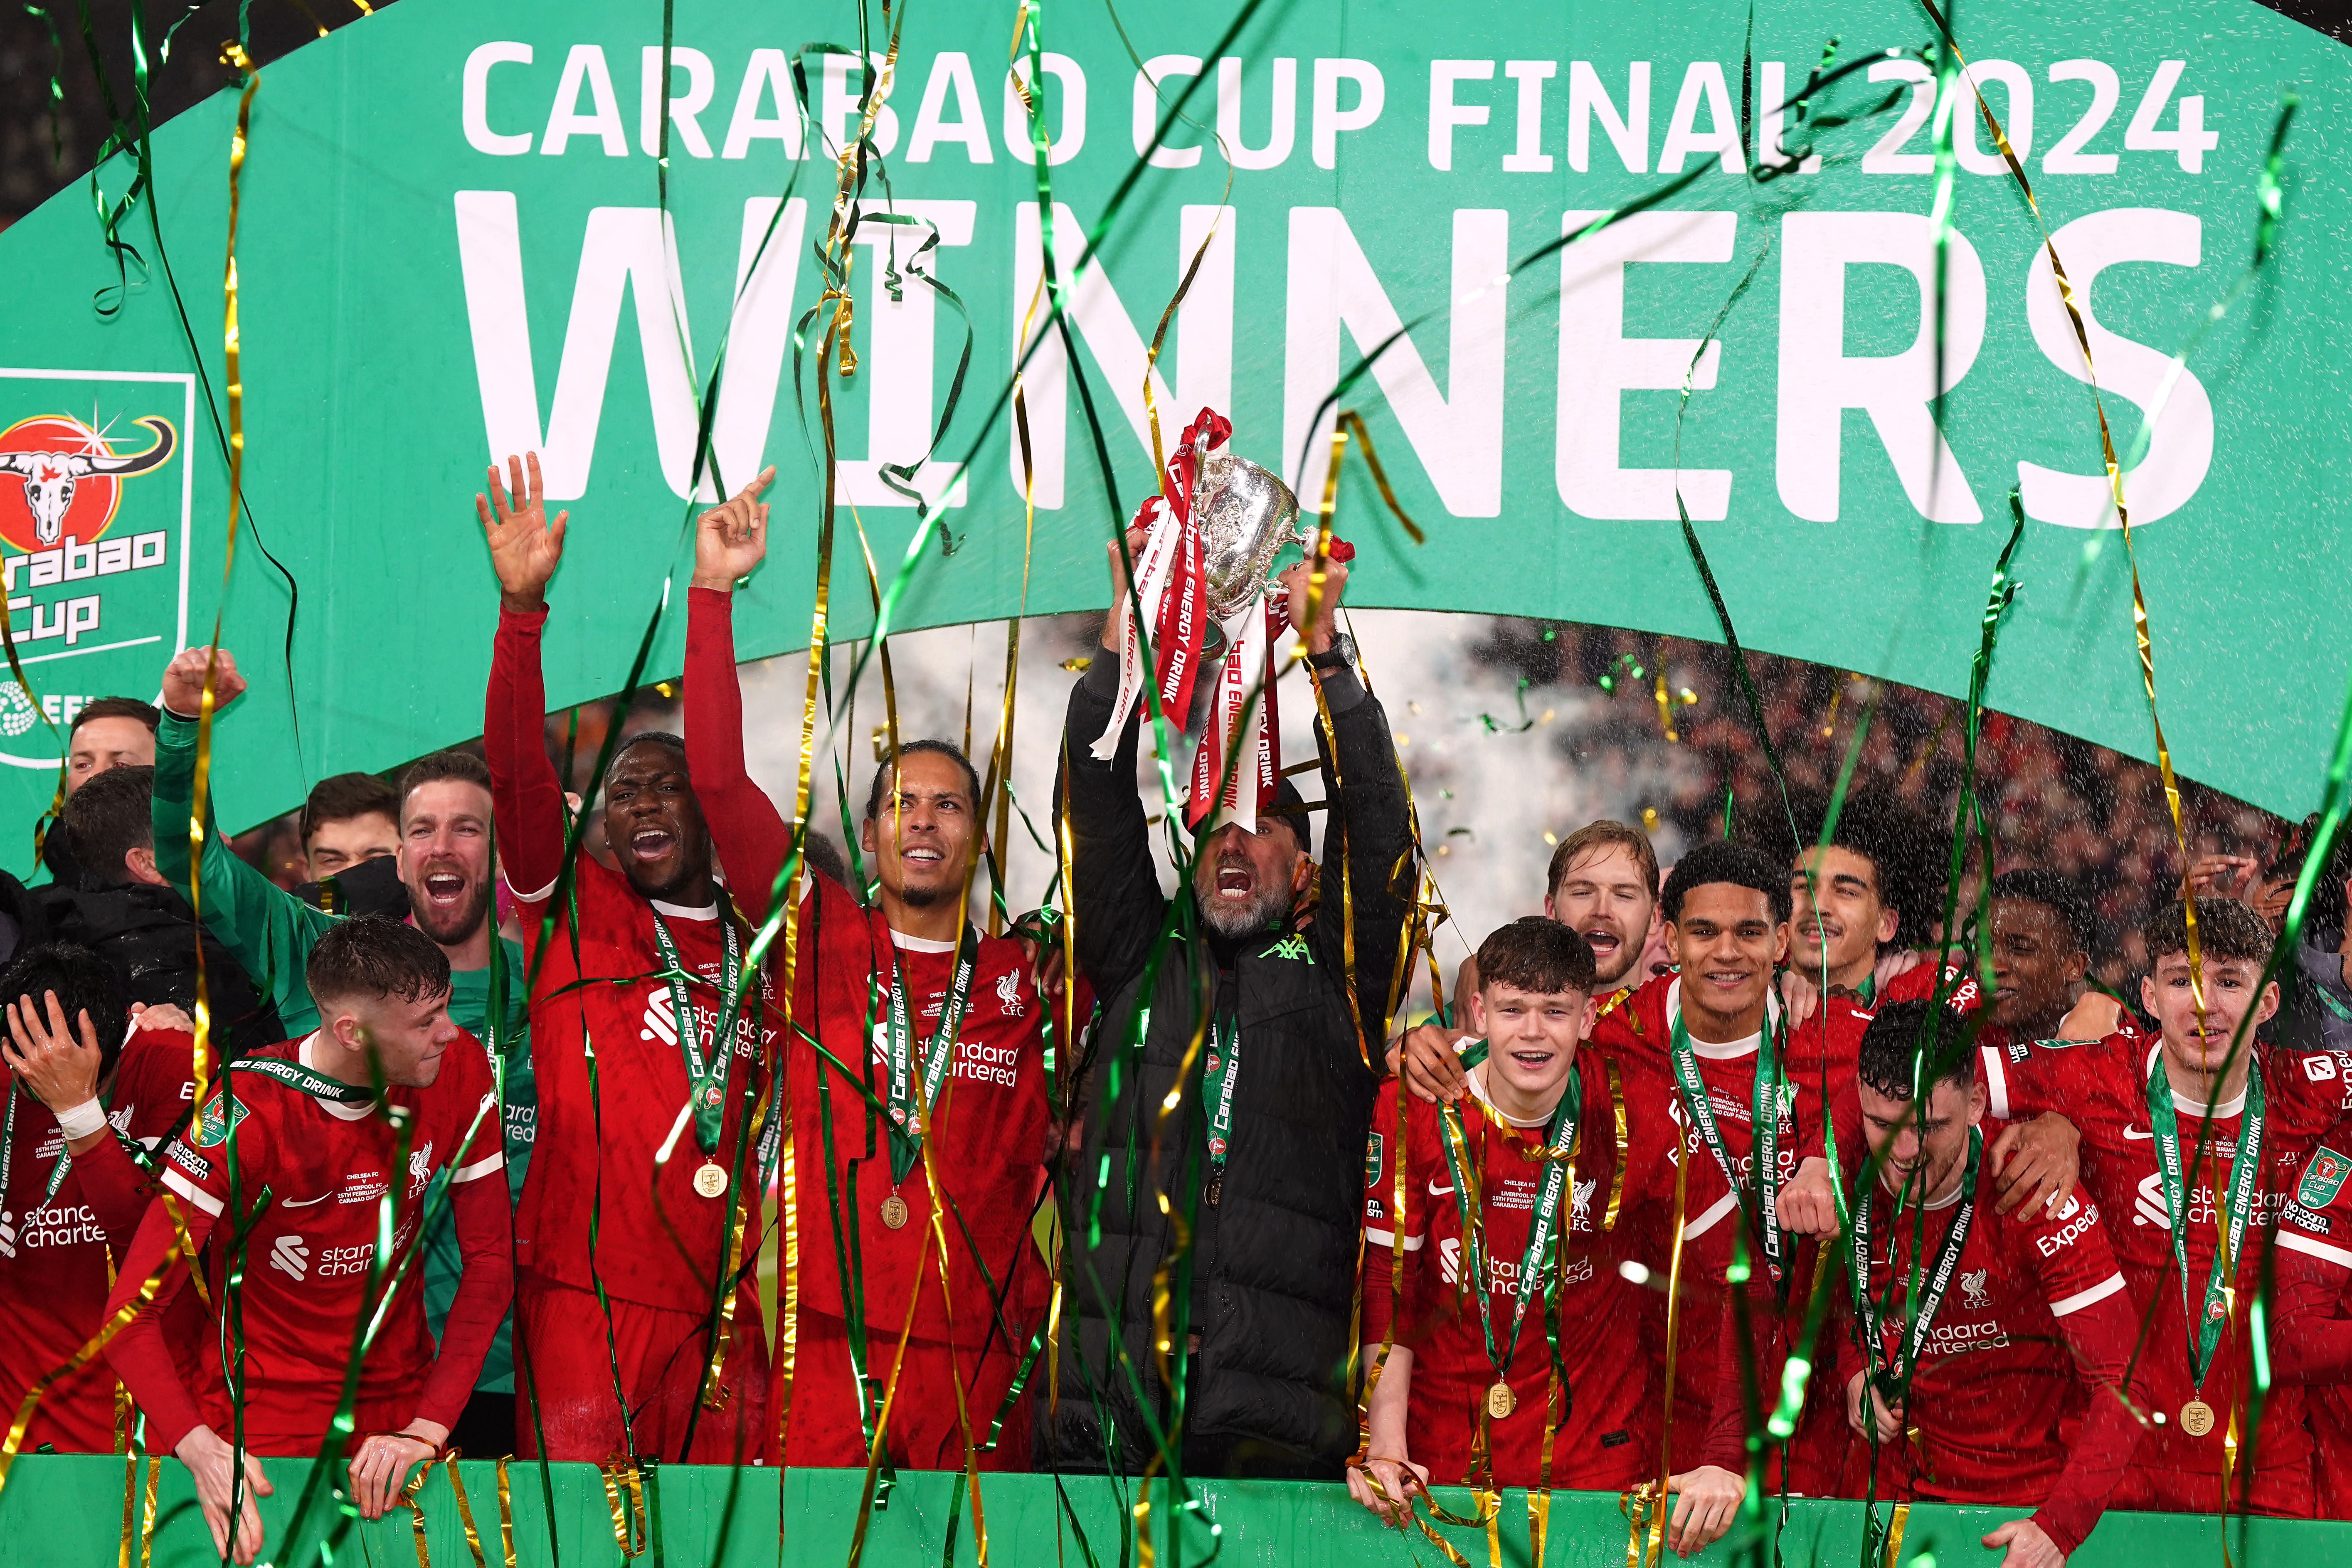 The 2024 Carabao Cup was the final trophy of a silverware-laden spell at Anfield for Klopp